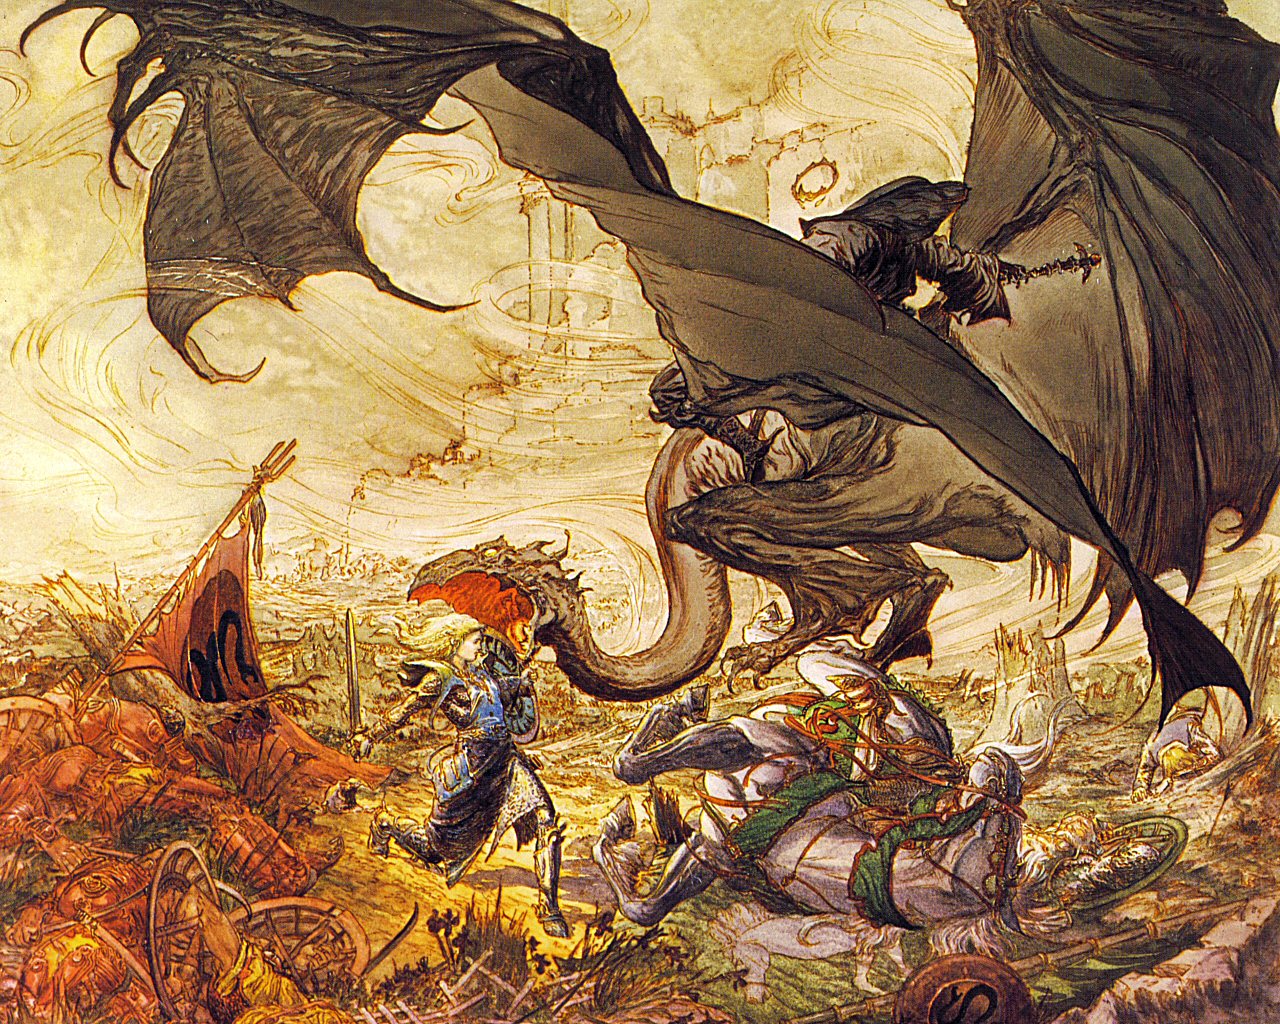 Michael_William_Kaluta_03_-_Eowyn_and_the_Witch_King_of_Angmar_1280x1024.jpg